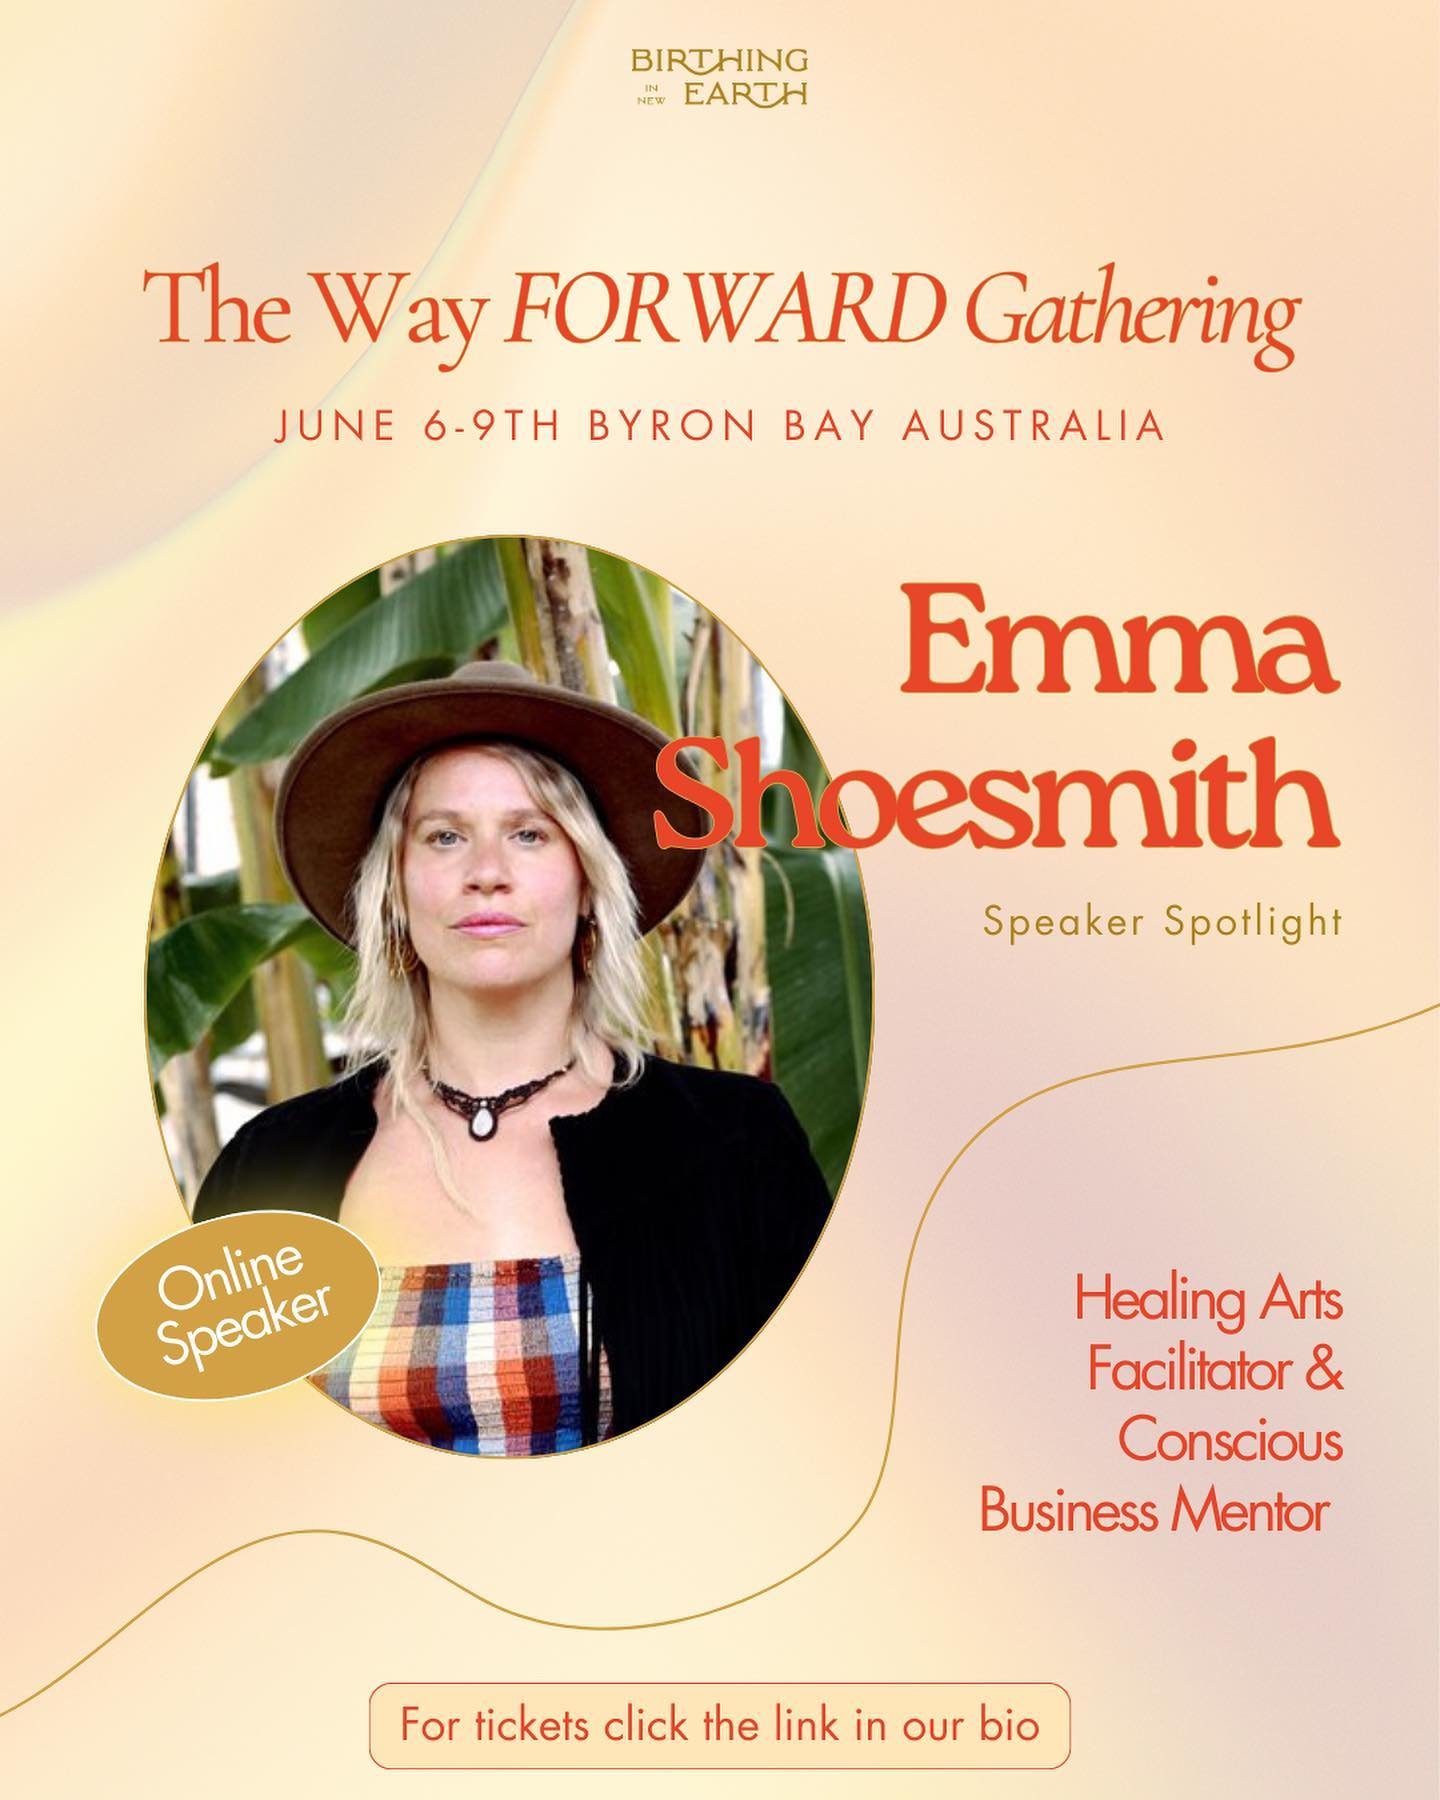 Super stoked to be speaking and sharing my skills at the 3rd @birthing_in_new_earth online gathering. 

Im slightly gutted I can&rsquo;t join the live event in Byron Bay but I assure you the online portal will be just as potent.

You can scoop your t